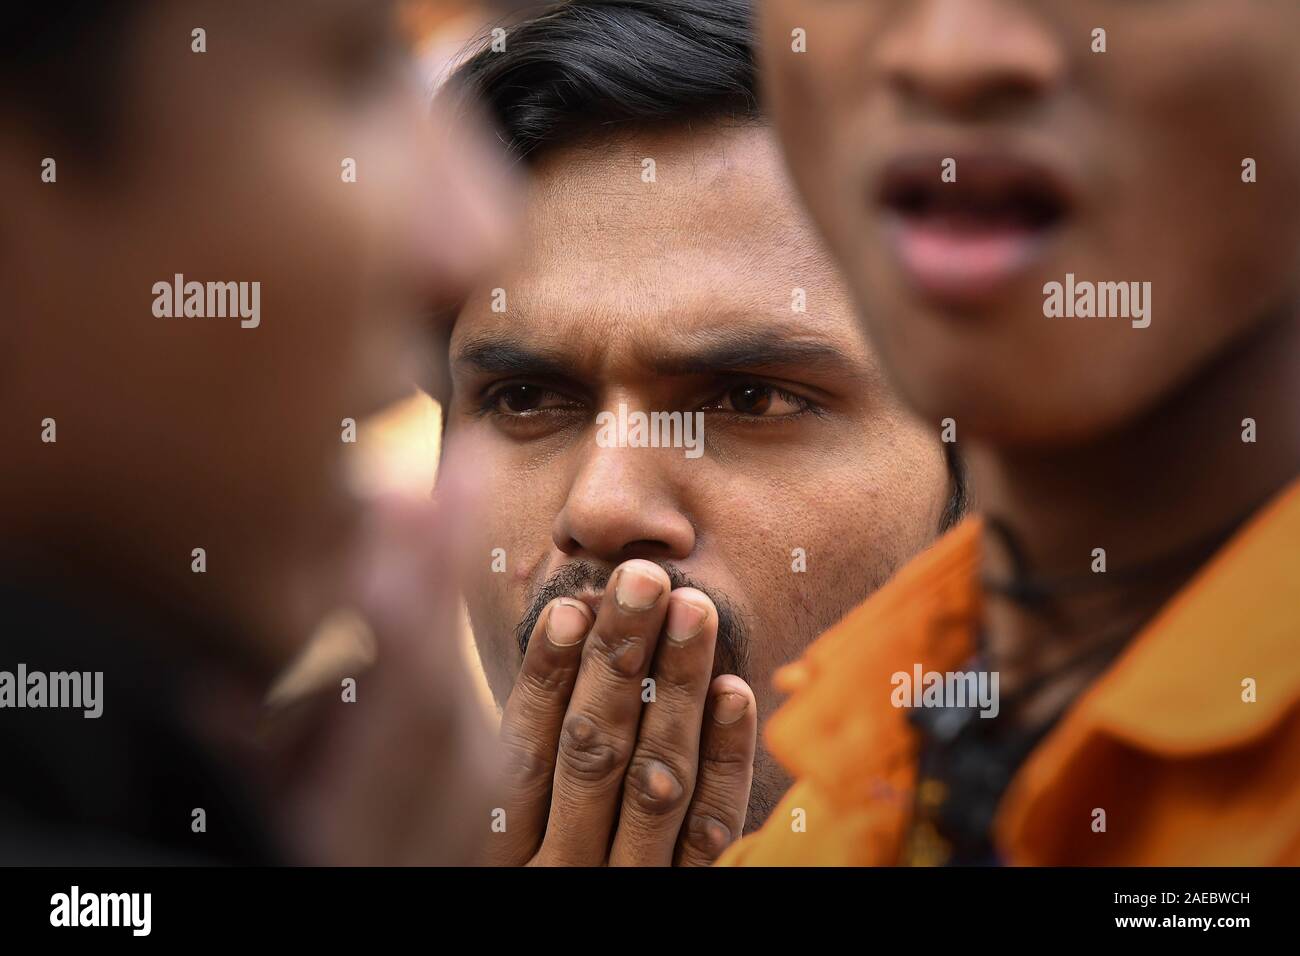 New Delhi, India. 8th Dec, 2019. Relatives of victims of a fire incident wait outside a mortuary in New Delhi, India, Dec. 8, 2019. At least 43 people died and more than 50 injured in the fire incident. The injured are undergoing medical treatment at four different hospitals. The fire broke out in north Delhi's Filmistan area in the early hours of Sunday when more than 100 people, mostly labourers, were asleep inside a four-storey building. Credit: Str/Xinhua/Alamy Live News Stock Photo